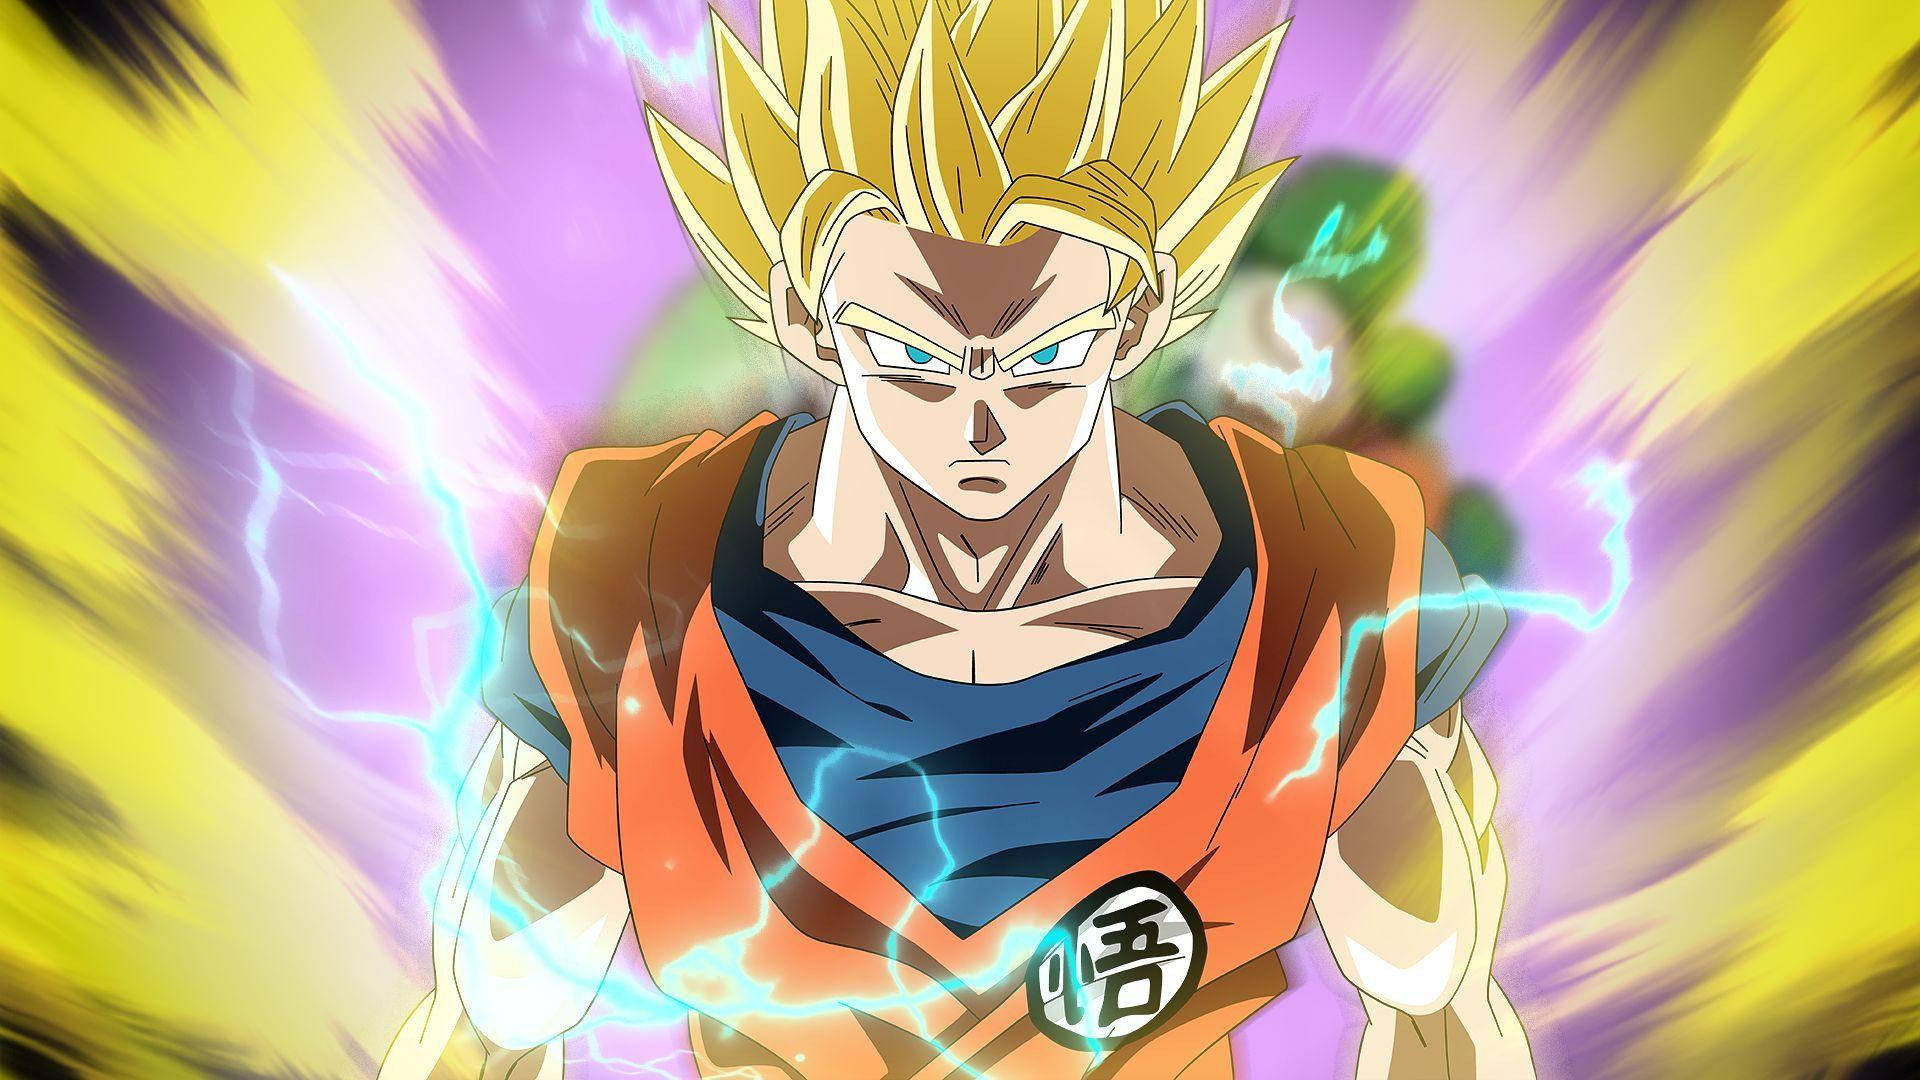 Unleash Goku's full power in the fight against evil with Dragon Ball Super Wallpaper